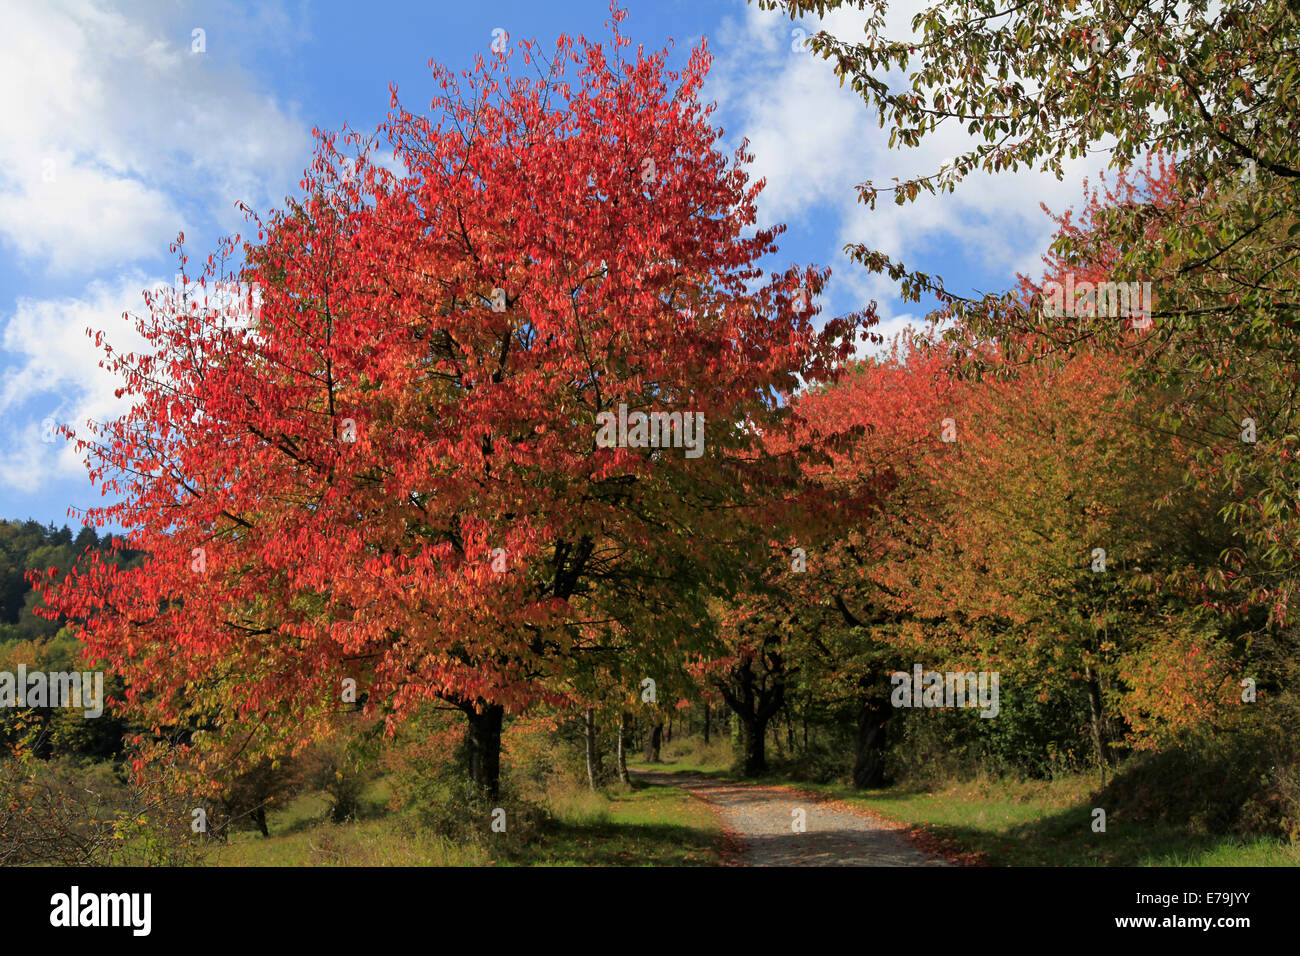 Colorful autumn leaves on the trees in the Rhoen near Wiesenthal. Photo: Klaus Nowottnick Date: October 9, 2012 Stock Photo